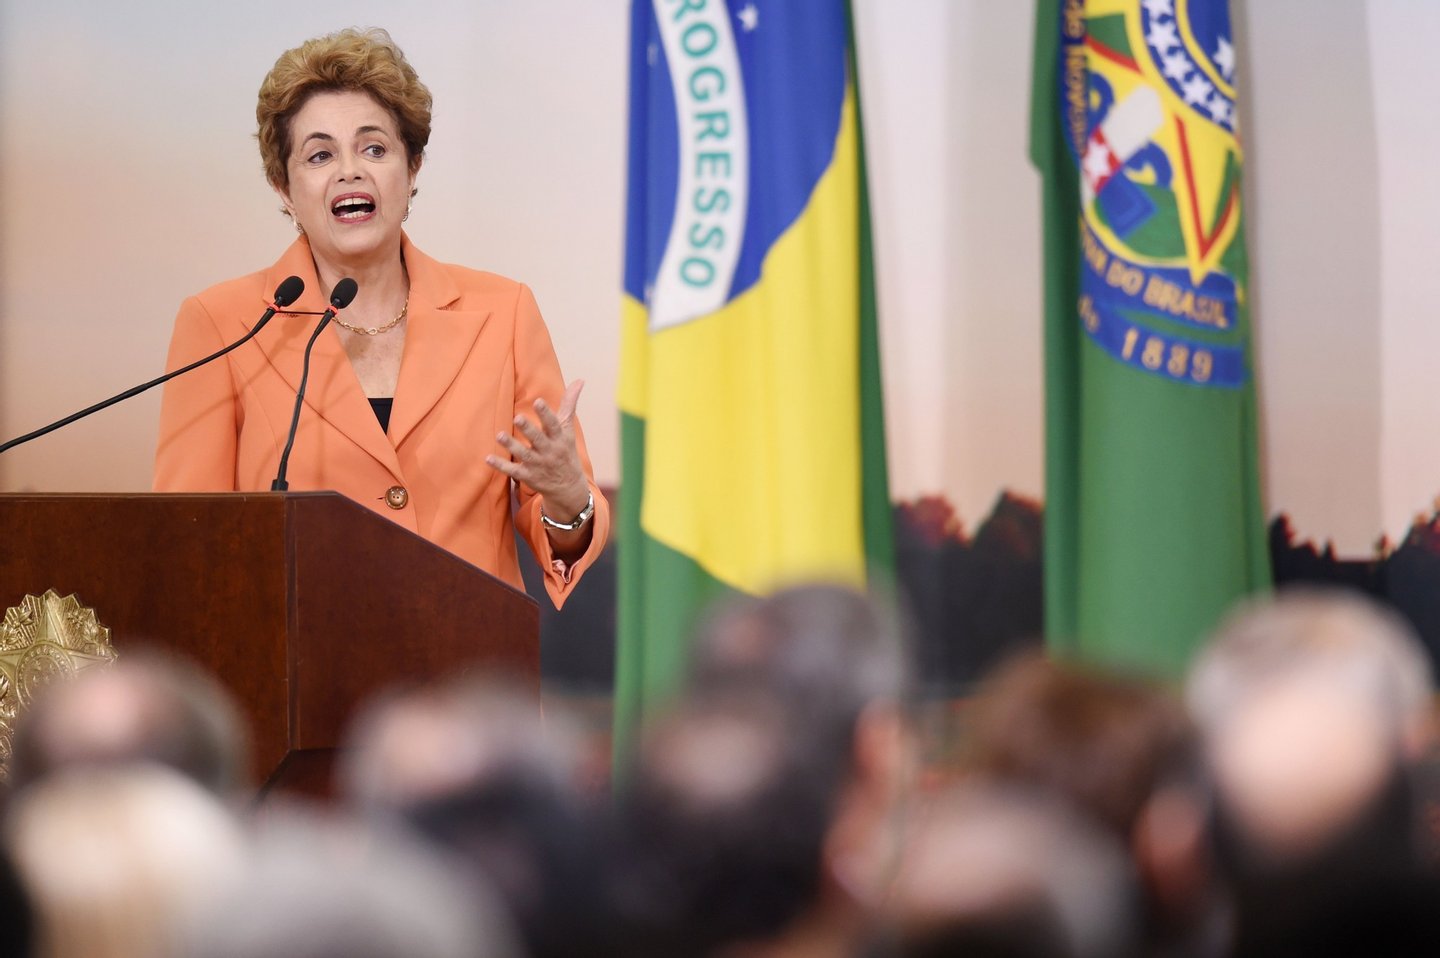 Brazilian President Dilma Rousseff delivers a speech during the launching of the Agricultural and Livestock Plan for 2016/2017, at Planalto Palace in Brasilia, on May 4, 2016. Rousseff is fighting impeachment on allegations that she illegally borrowed money to boost public spending during her 2014 re-election campaign. / AFP / EVARISTO SA (Photo credit should read EVARISTO SA/AFP/Getty Images)